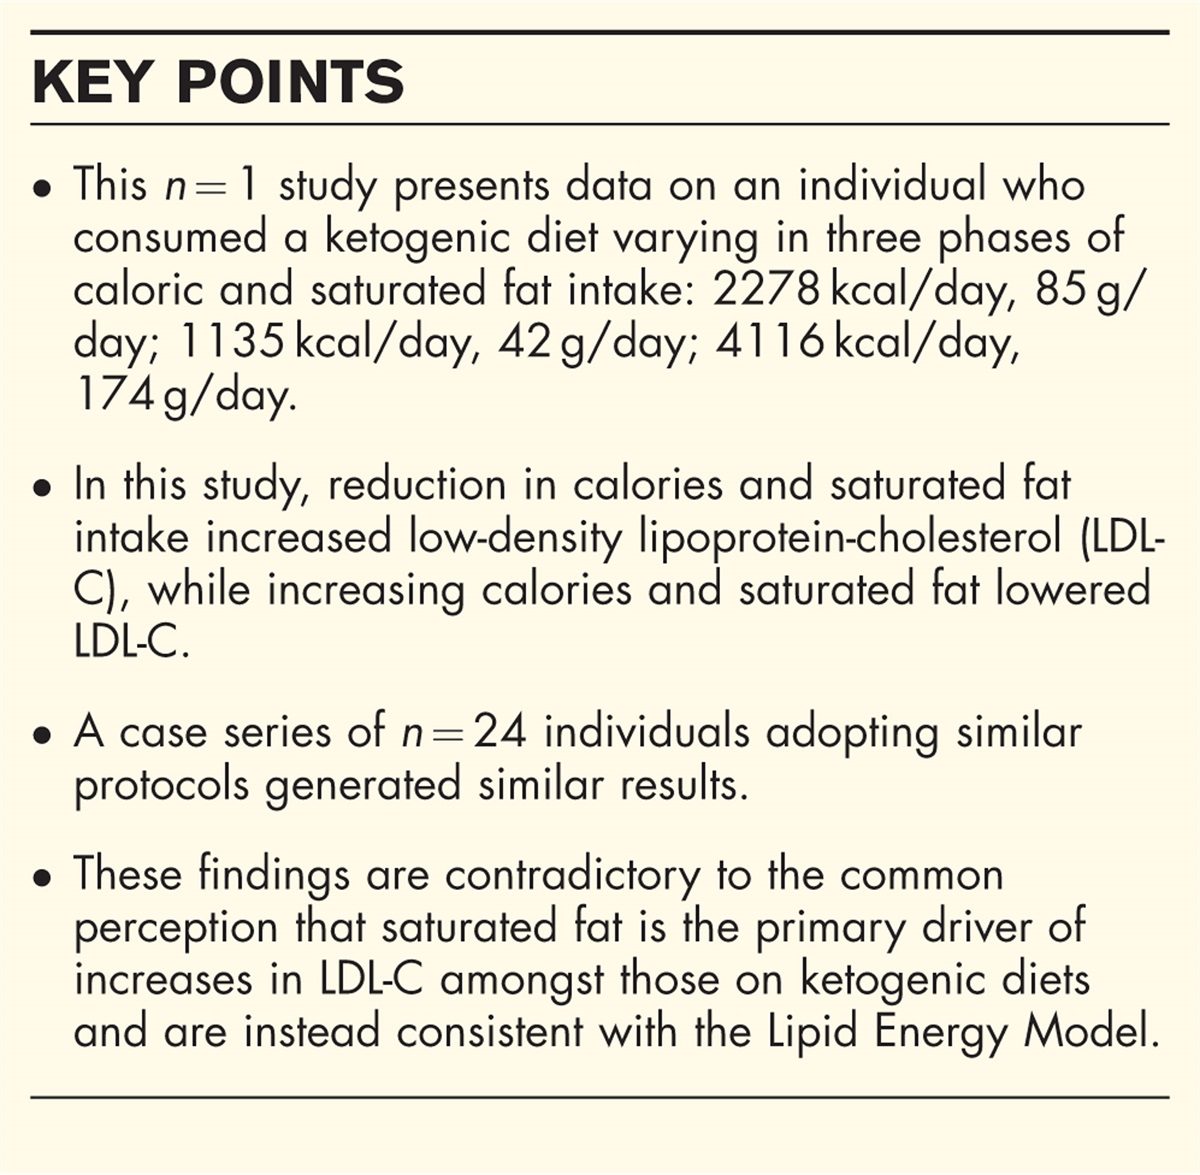 Short-term hyper-caloric high-fat feeding on a ketogenic diet can lower low-density lipoprotein cholesterol: the cholesterol drop experiment